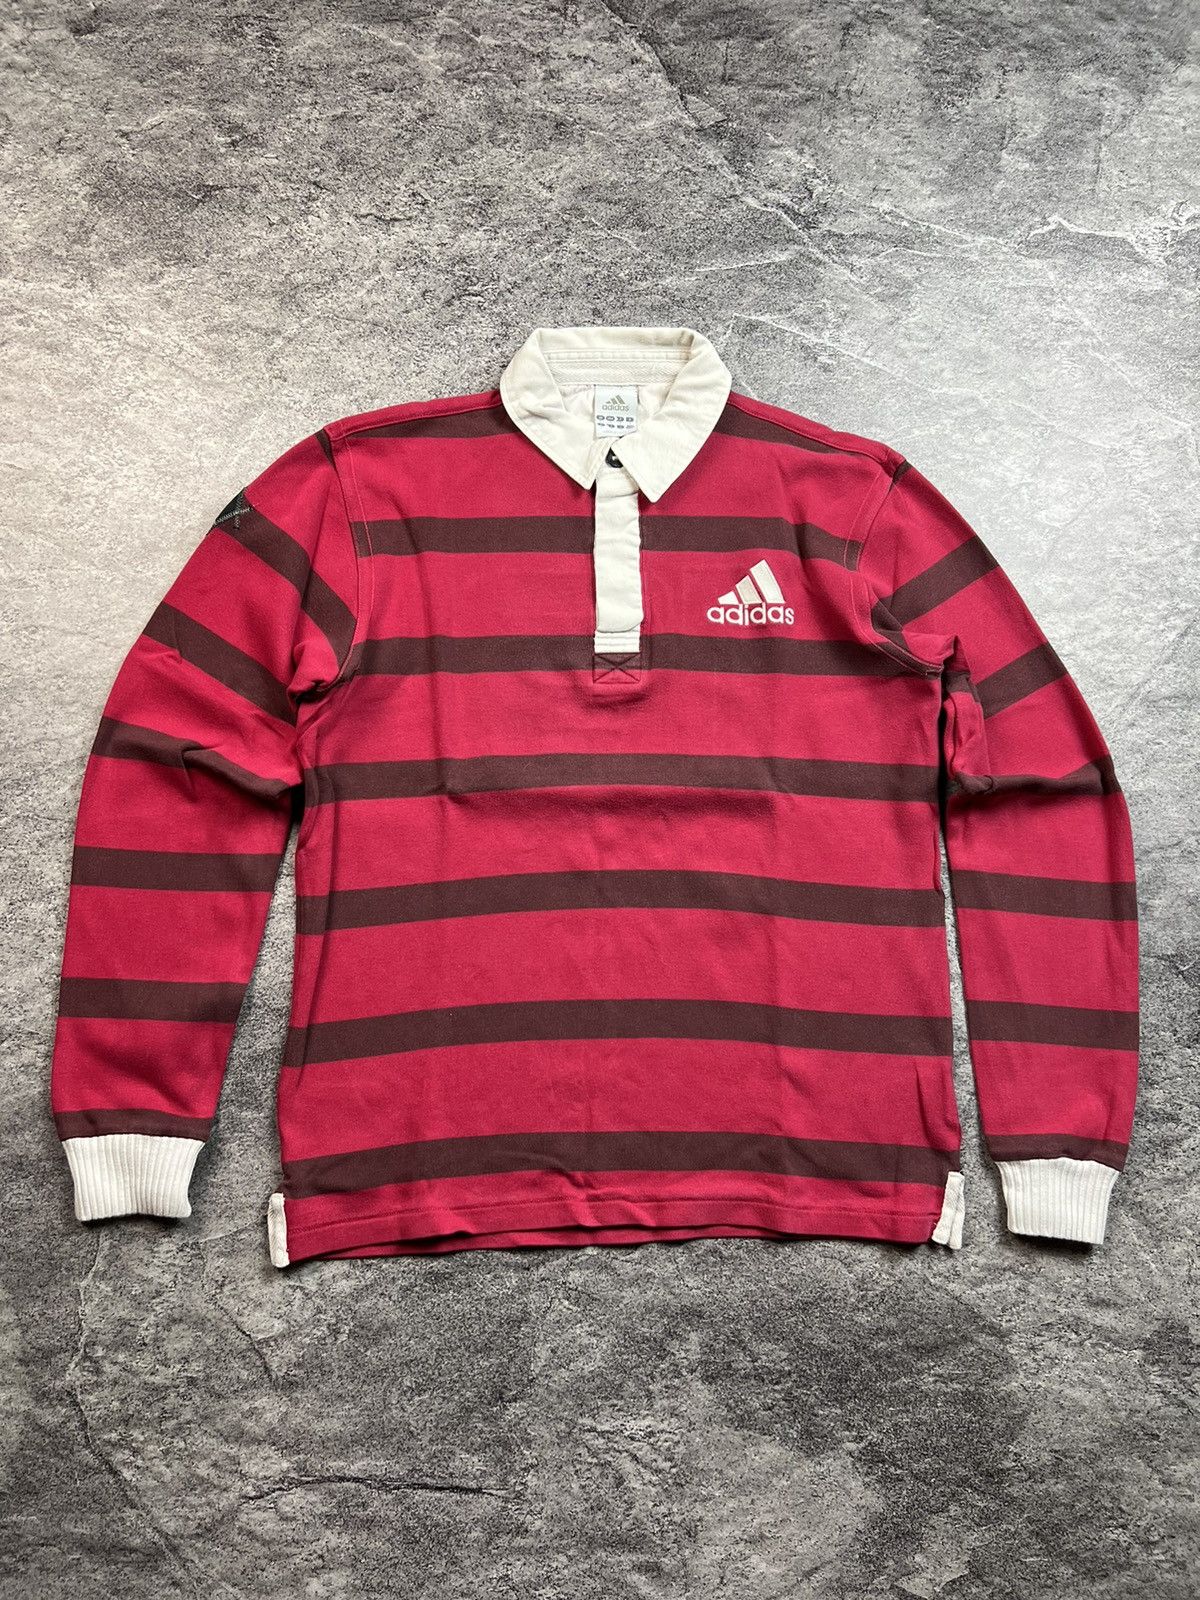 Pre-owned Adidas X Vintage Y2k Adidas Striped Soccer Japan Rugby Polo Style Shirt In Pink